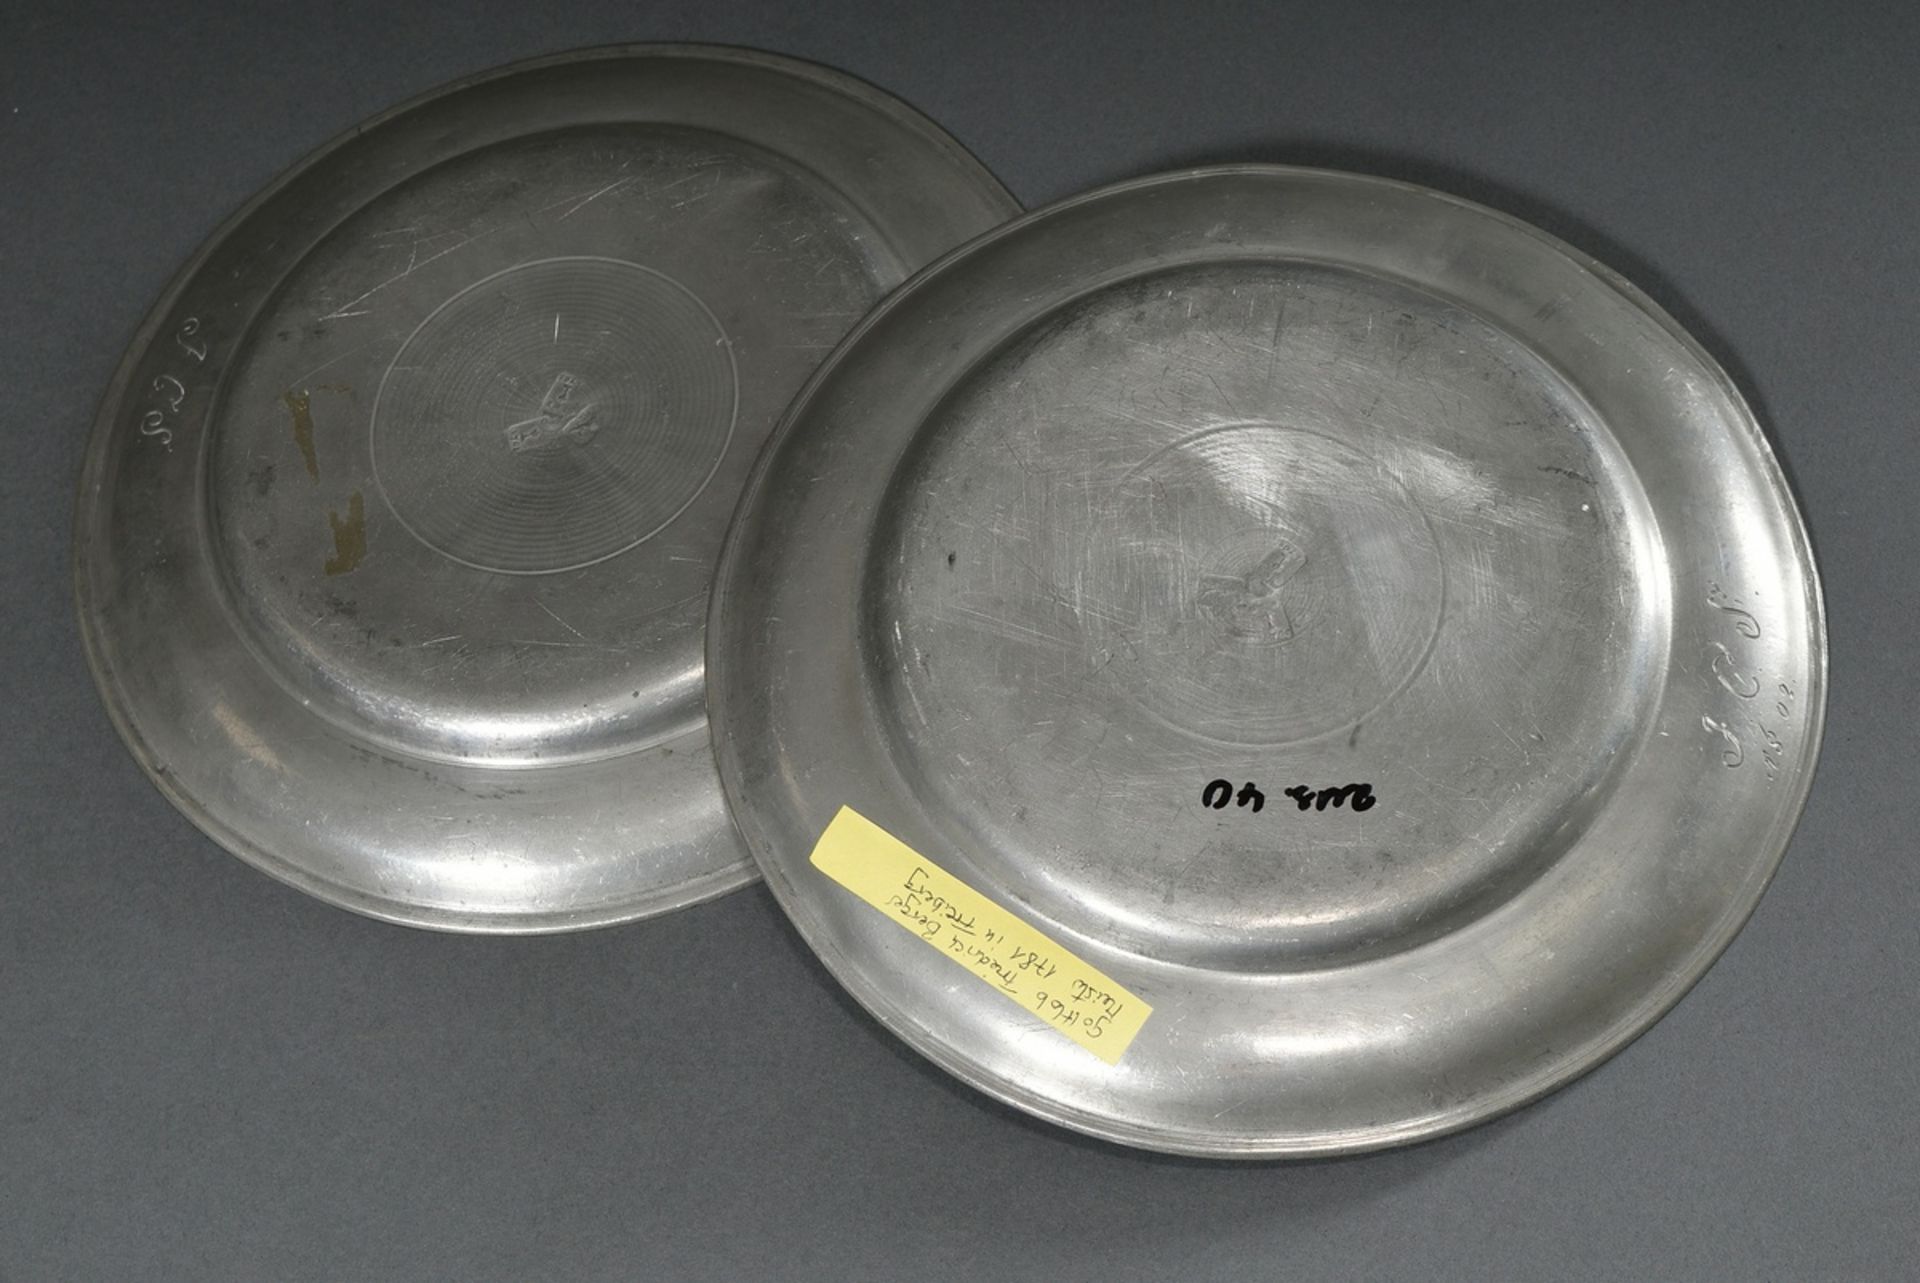 Pair of small Saxon pewter plates with monogram engravings "J.C.S. 1802", MZ: Gottlob Friedrich Ber - Image 6 of 7